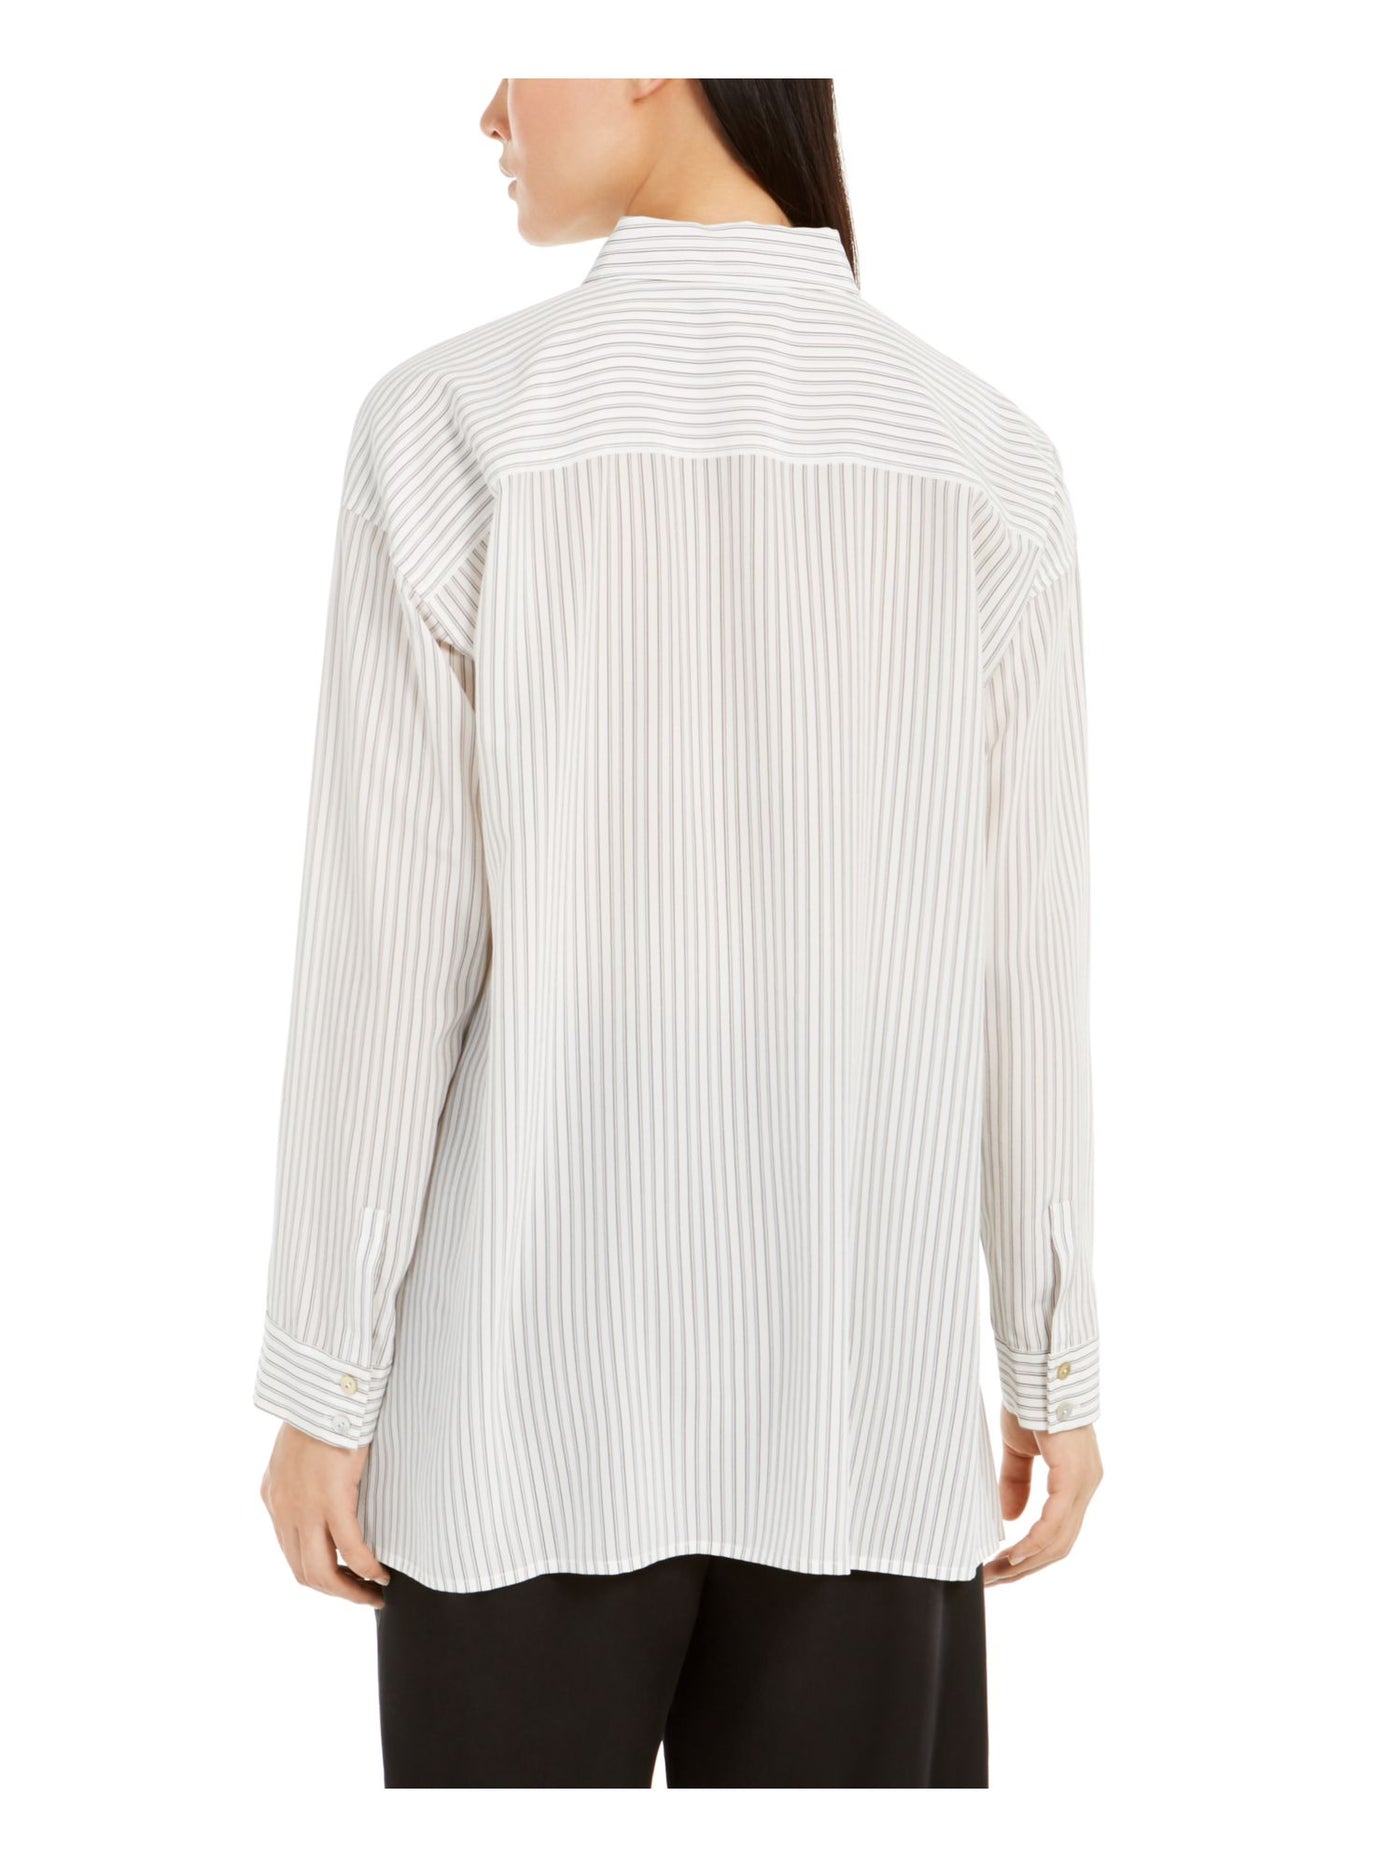 EILEEN FISHER Womens Ivory Silk Pinstripe Long Sleeve Collared Button Up Top XL